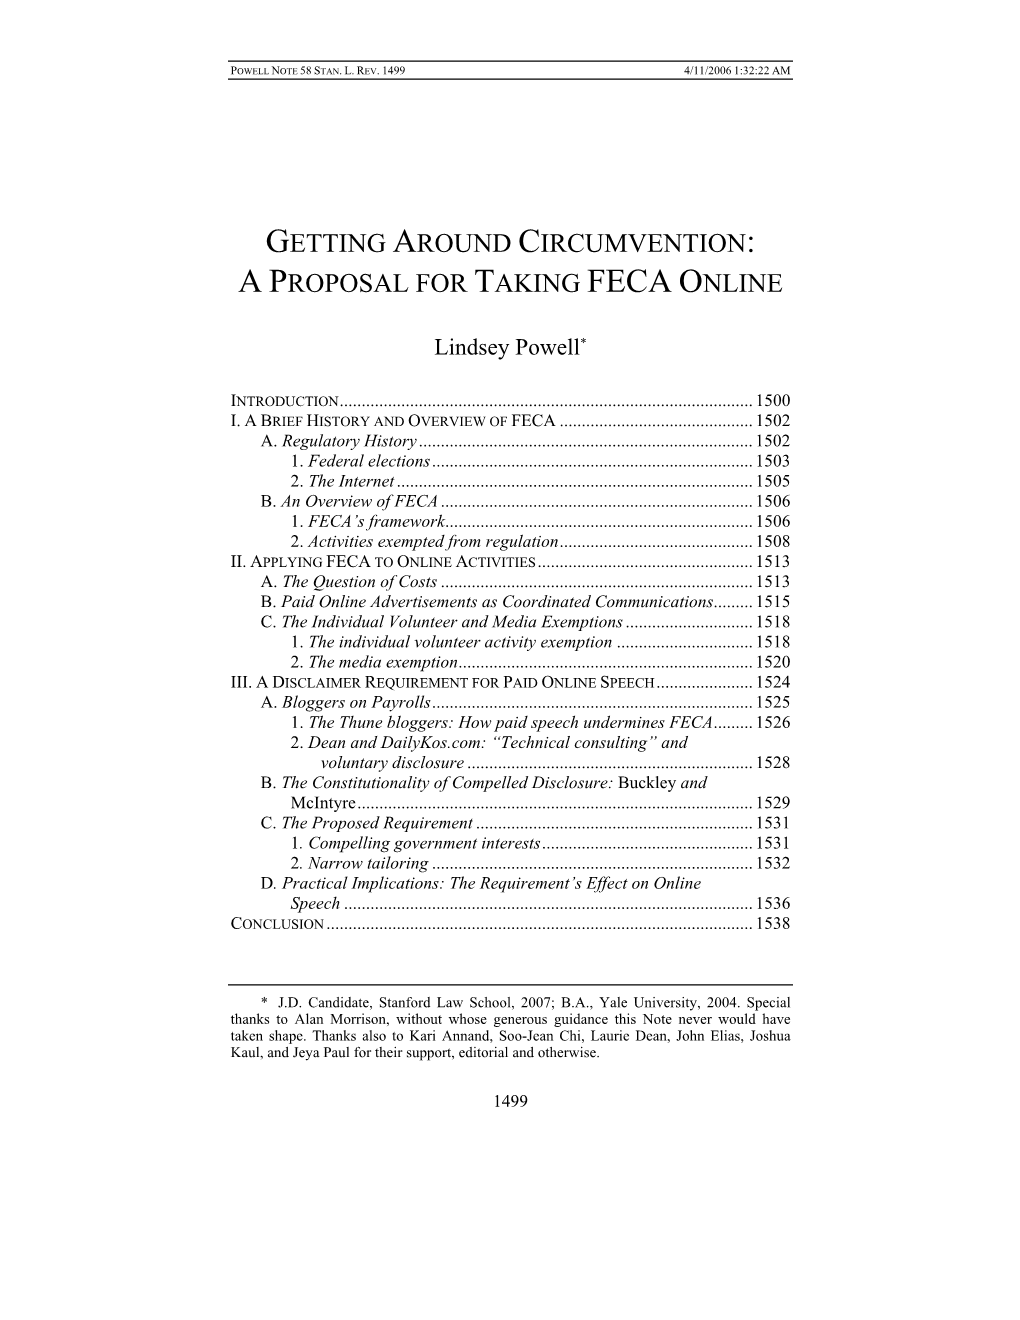 Getting Around Circumvention: a Proposal for Taking Feca Online